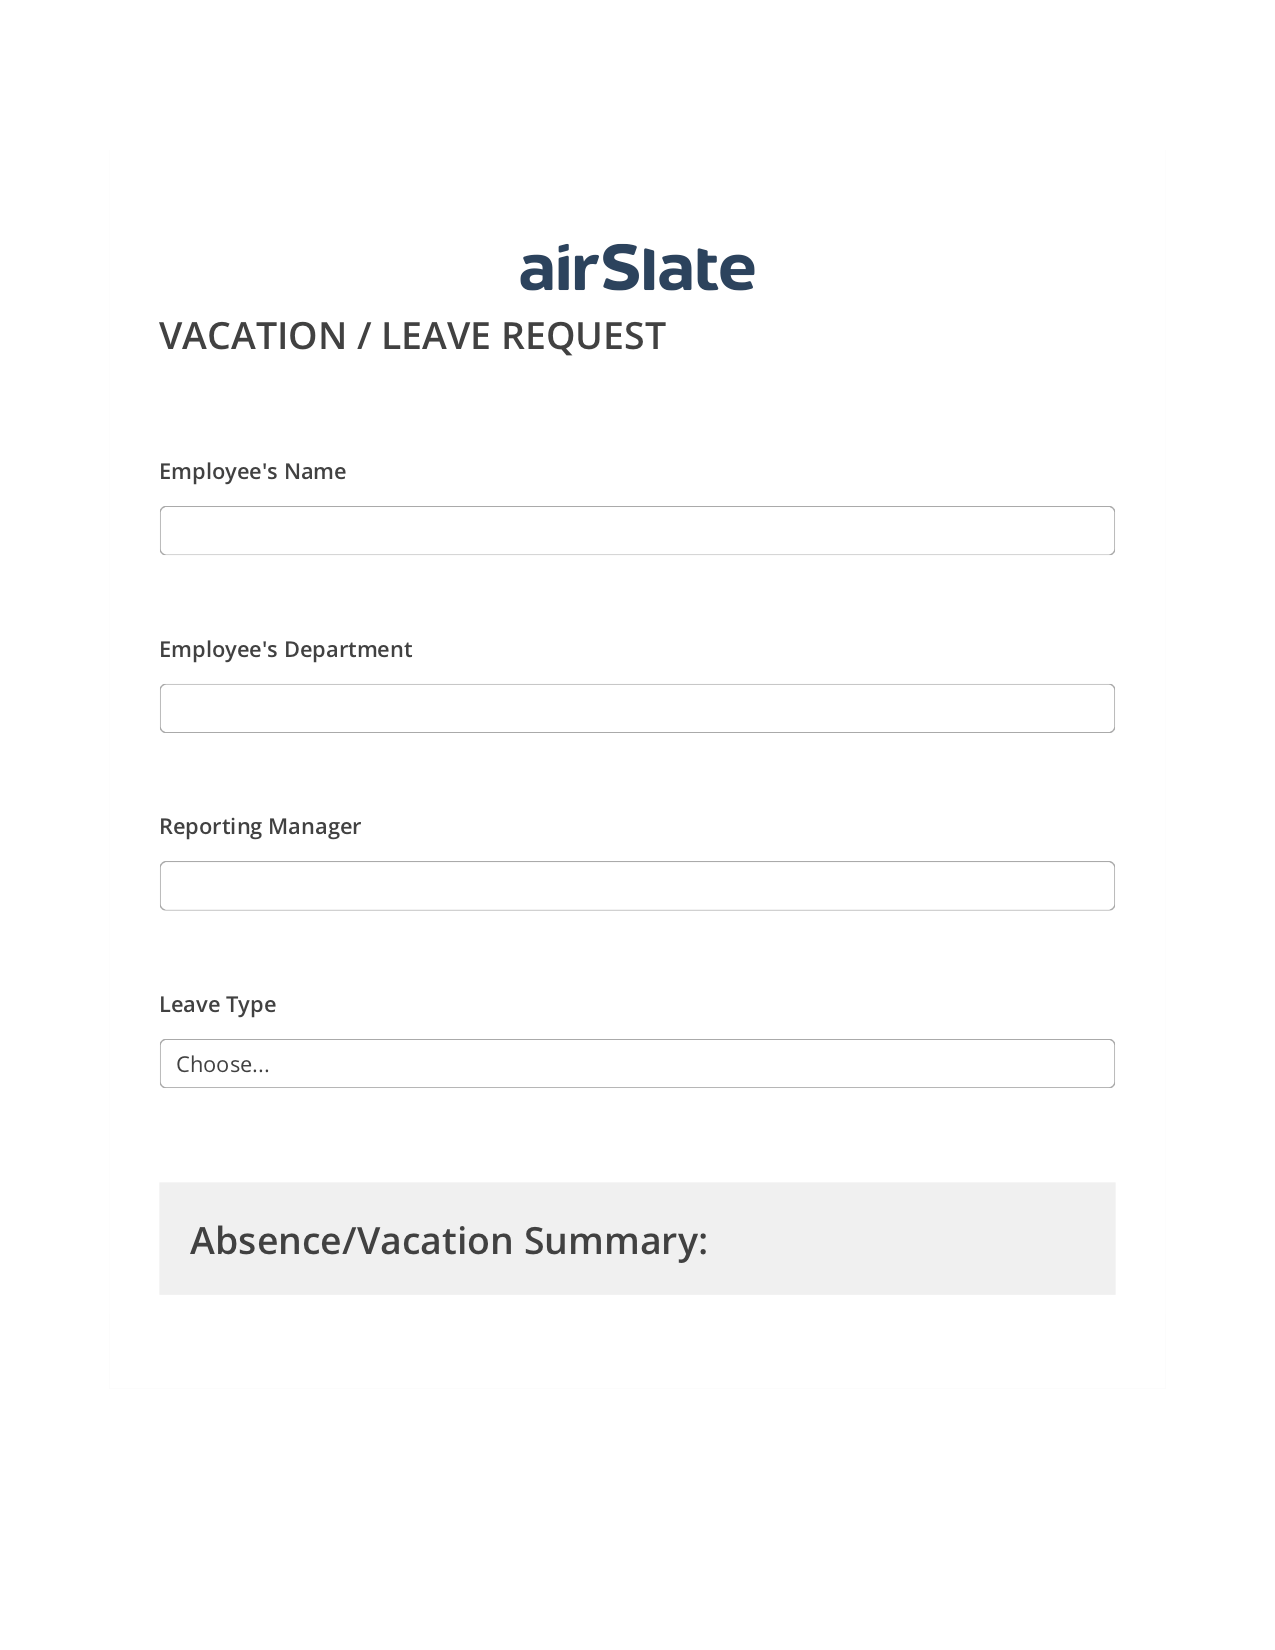 Multirole Vacation/Leave Request Workflow Pre-fill Dropdowns from Office 365 Excel Bot, Invoke Salesforce Process Bot, Archive to Google Drive Bot